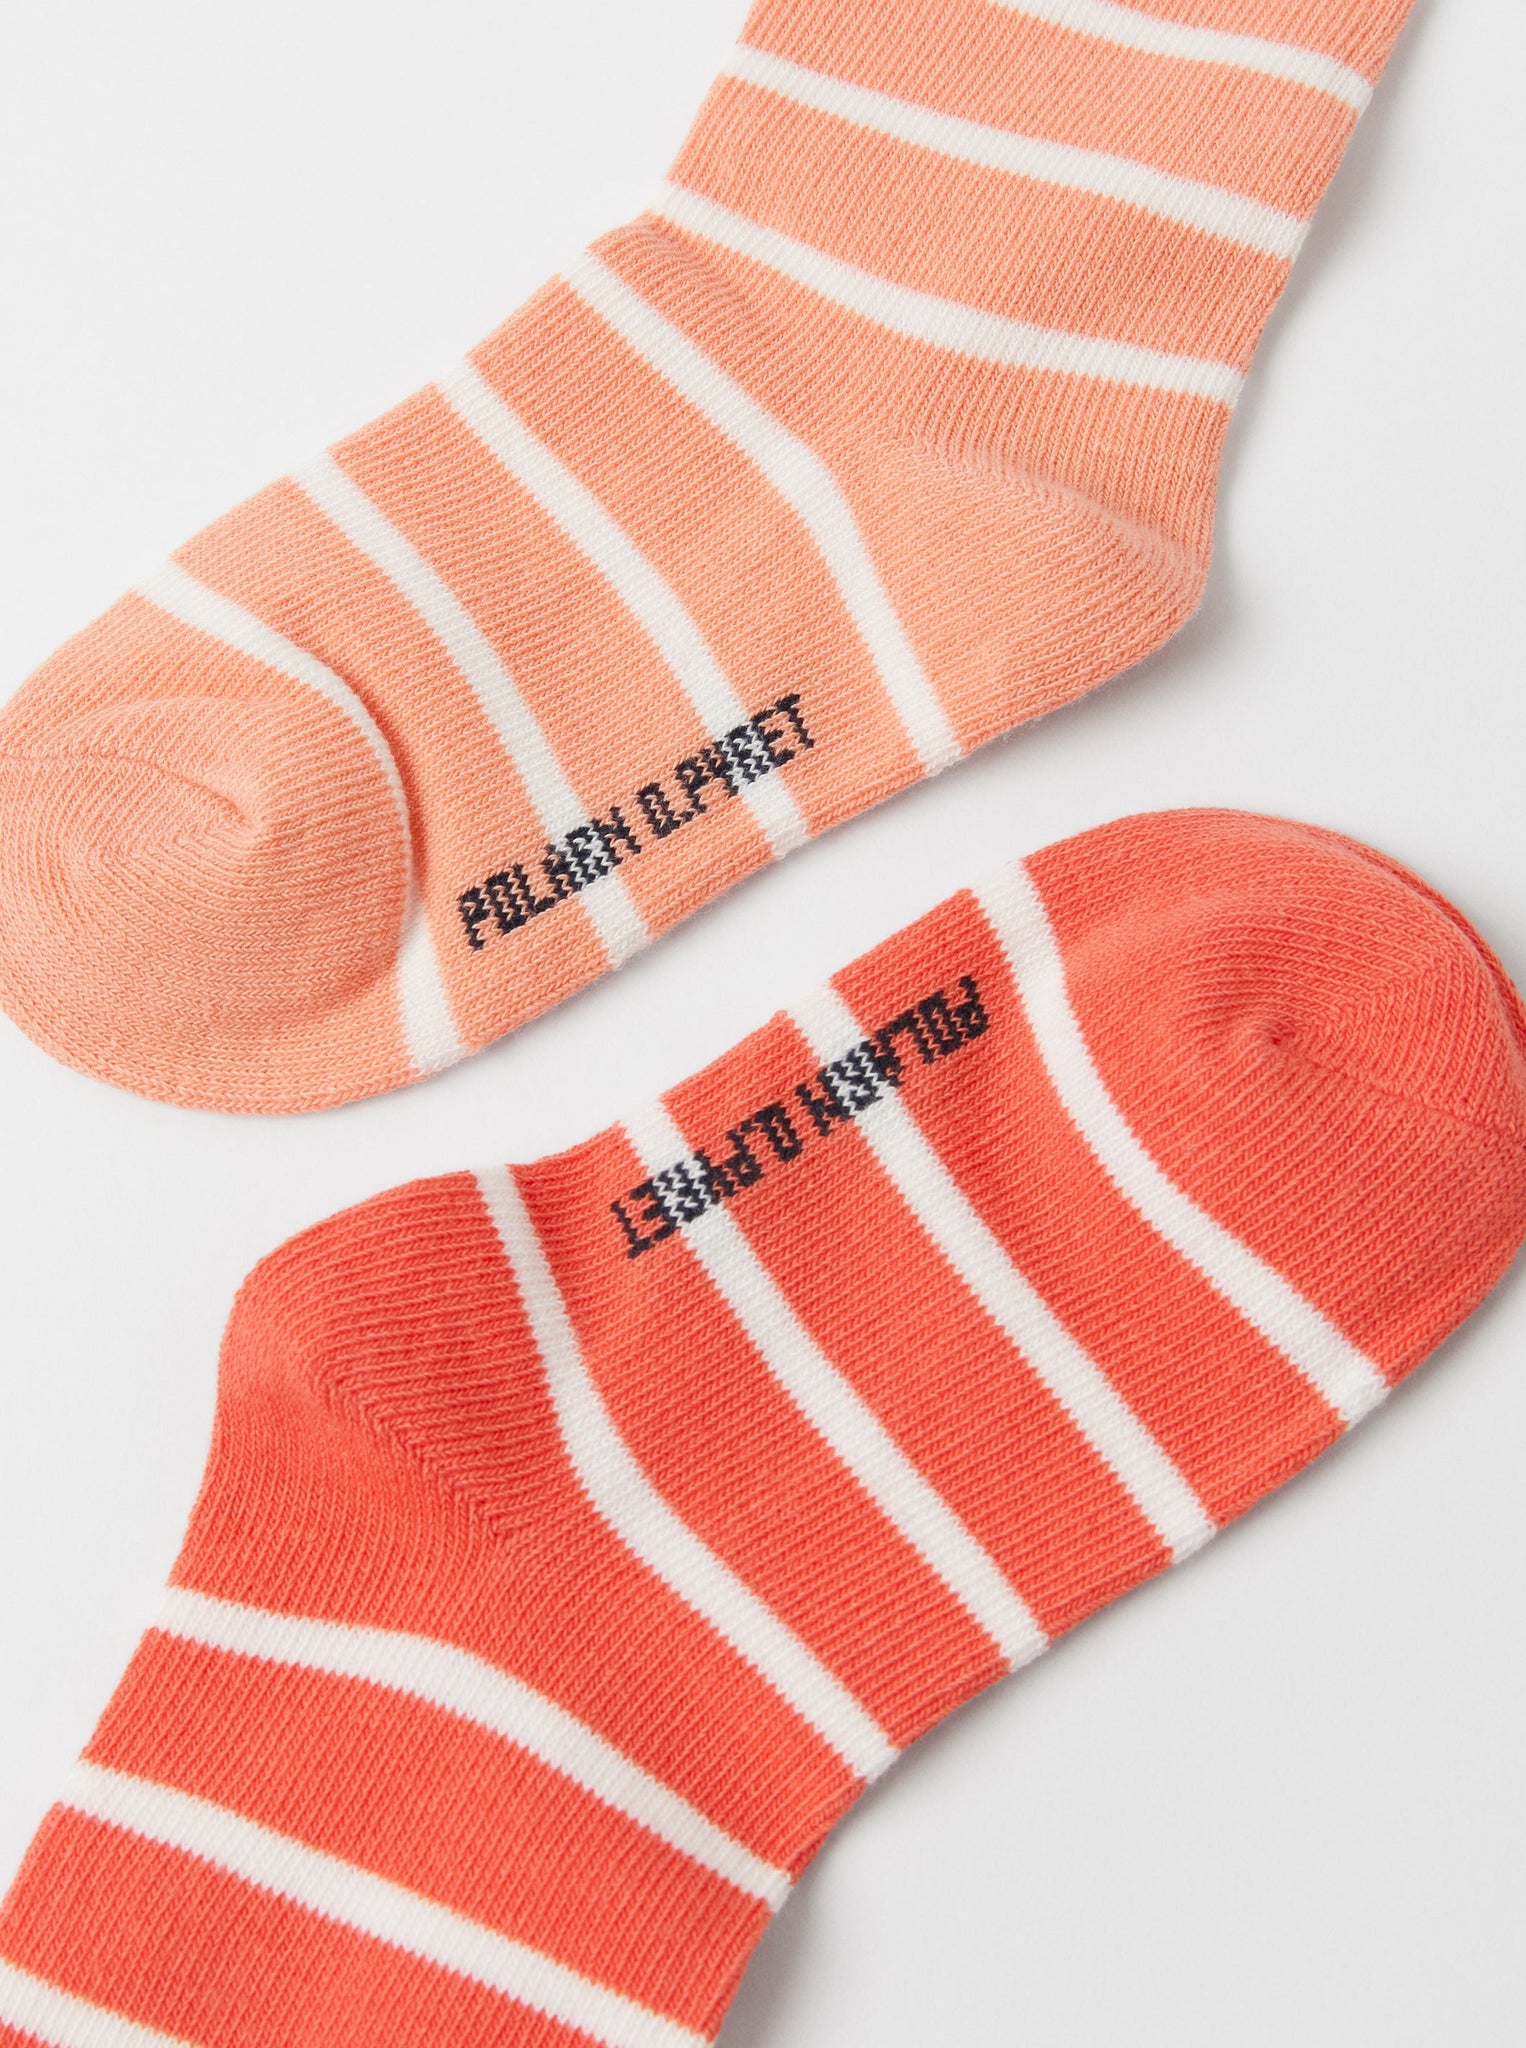 Two Pack Cotton Orange Kids Socks from the Polarn O. Pyret kidswear collection. Clothes made using sustainably sourced materials.